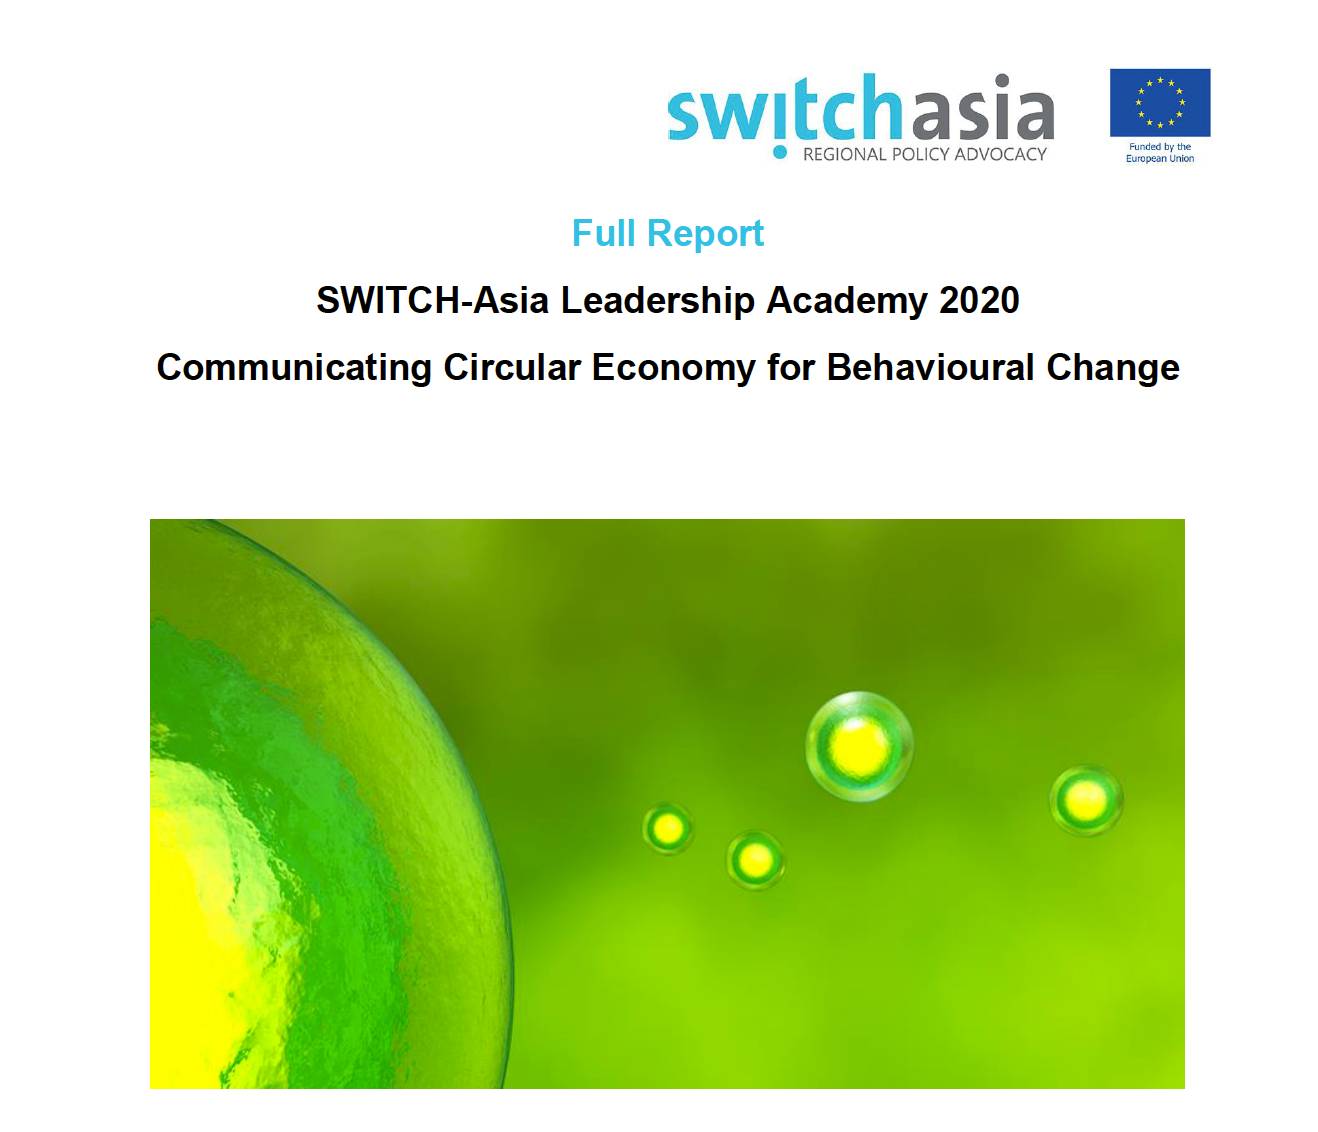 SWITCH-Asia Leadership Academy 2020: Communicating Circular Economy for Behavioural Change Report